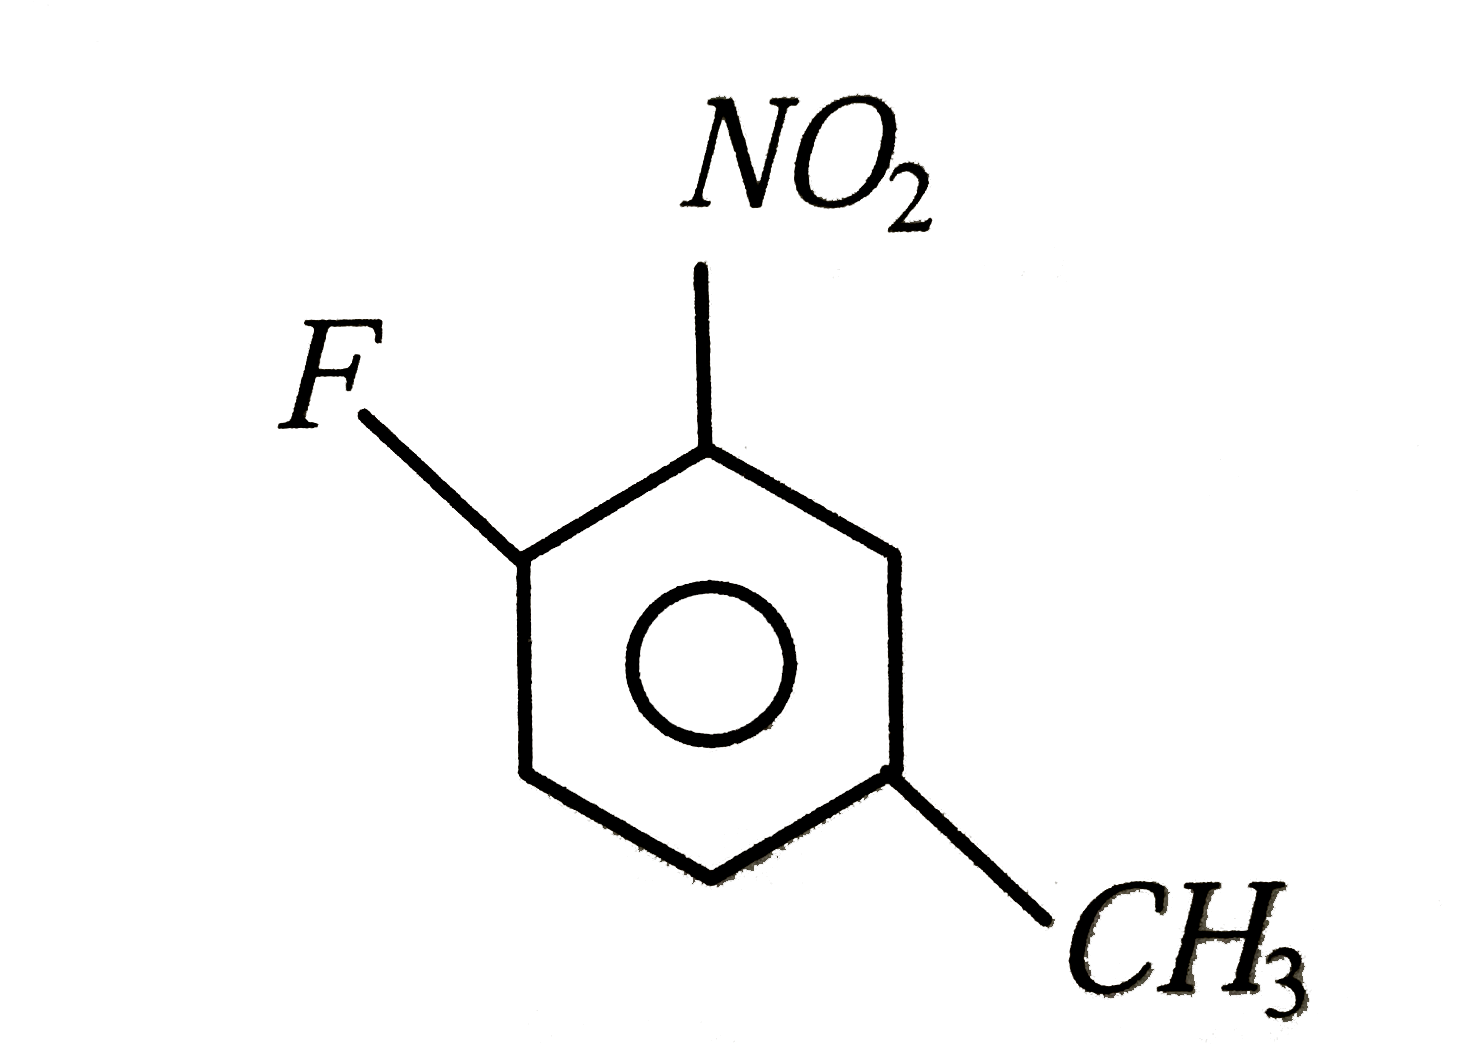 IUPAC name of the compound is